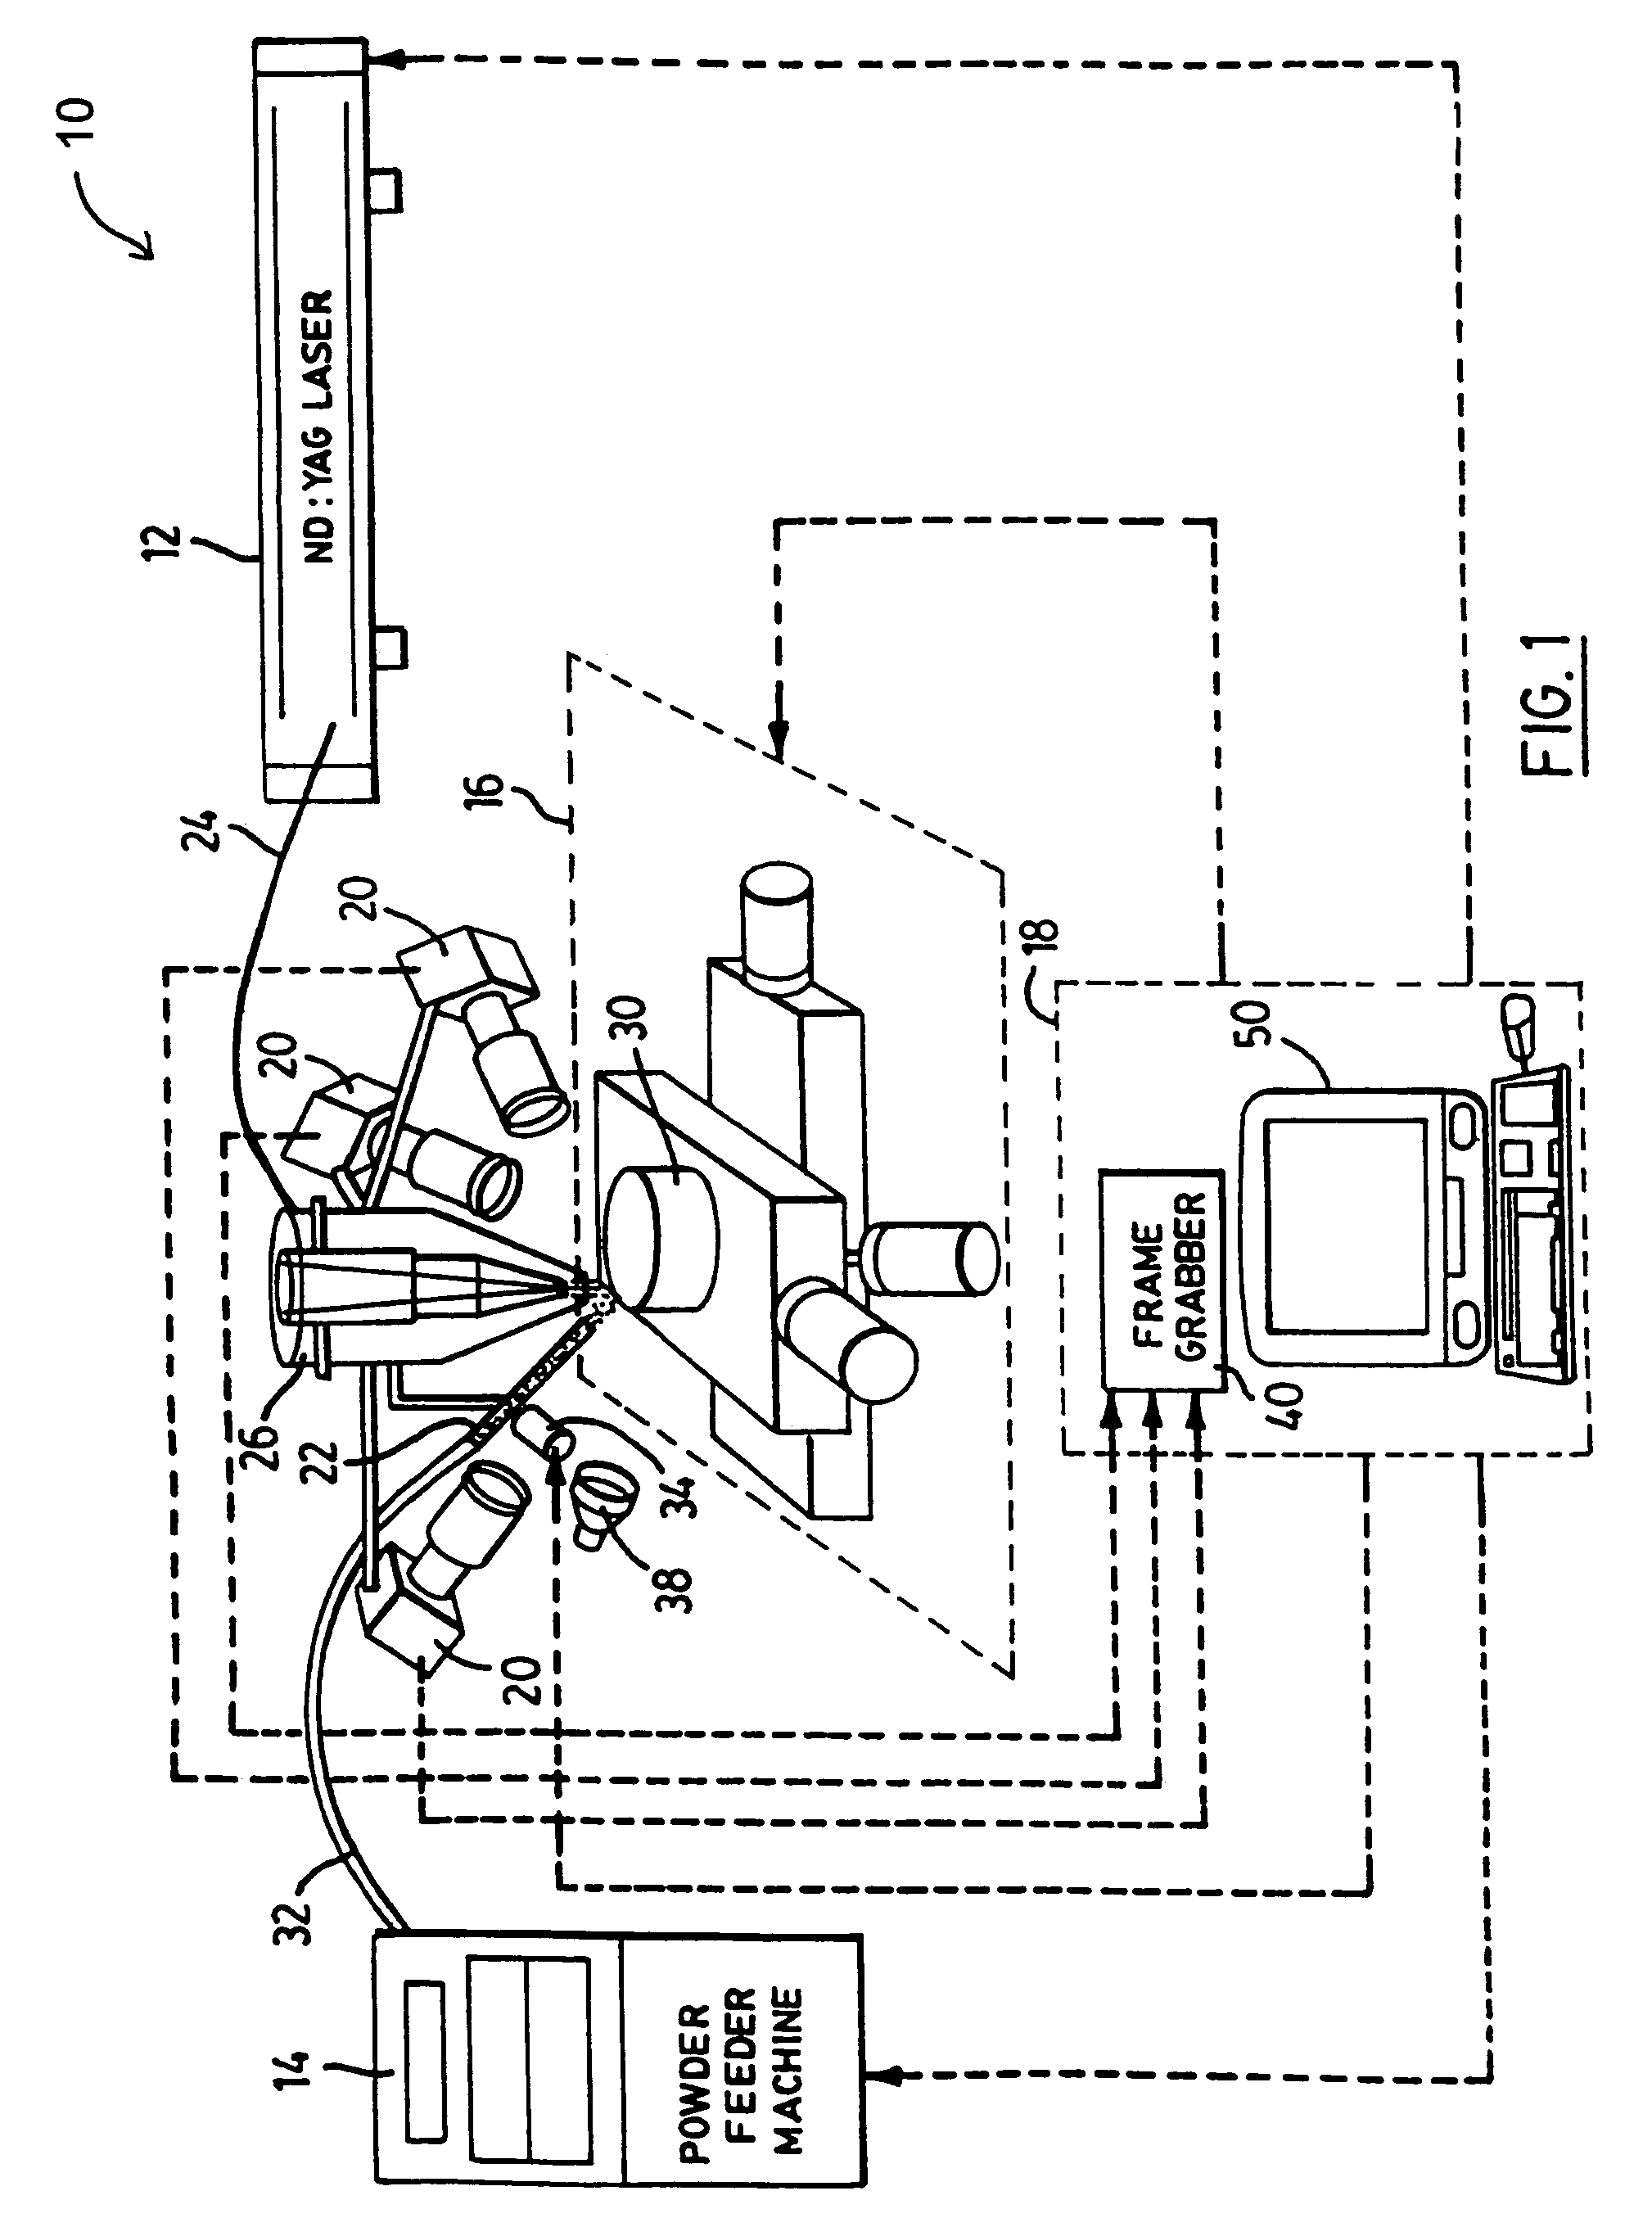 System and method for closed-loop control of laser cladding by powder injection